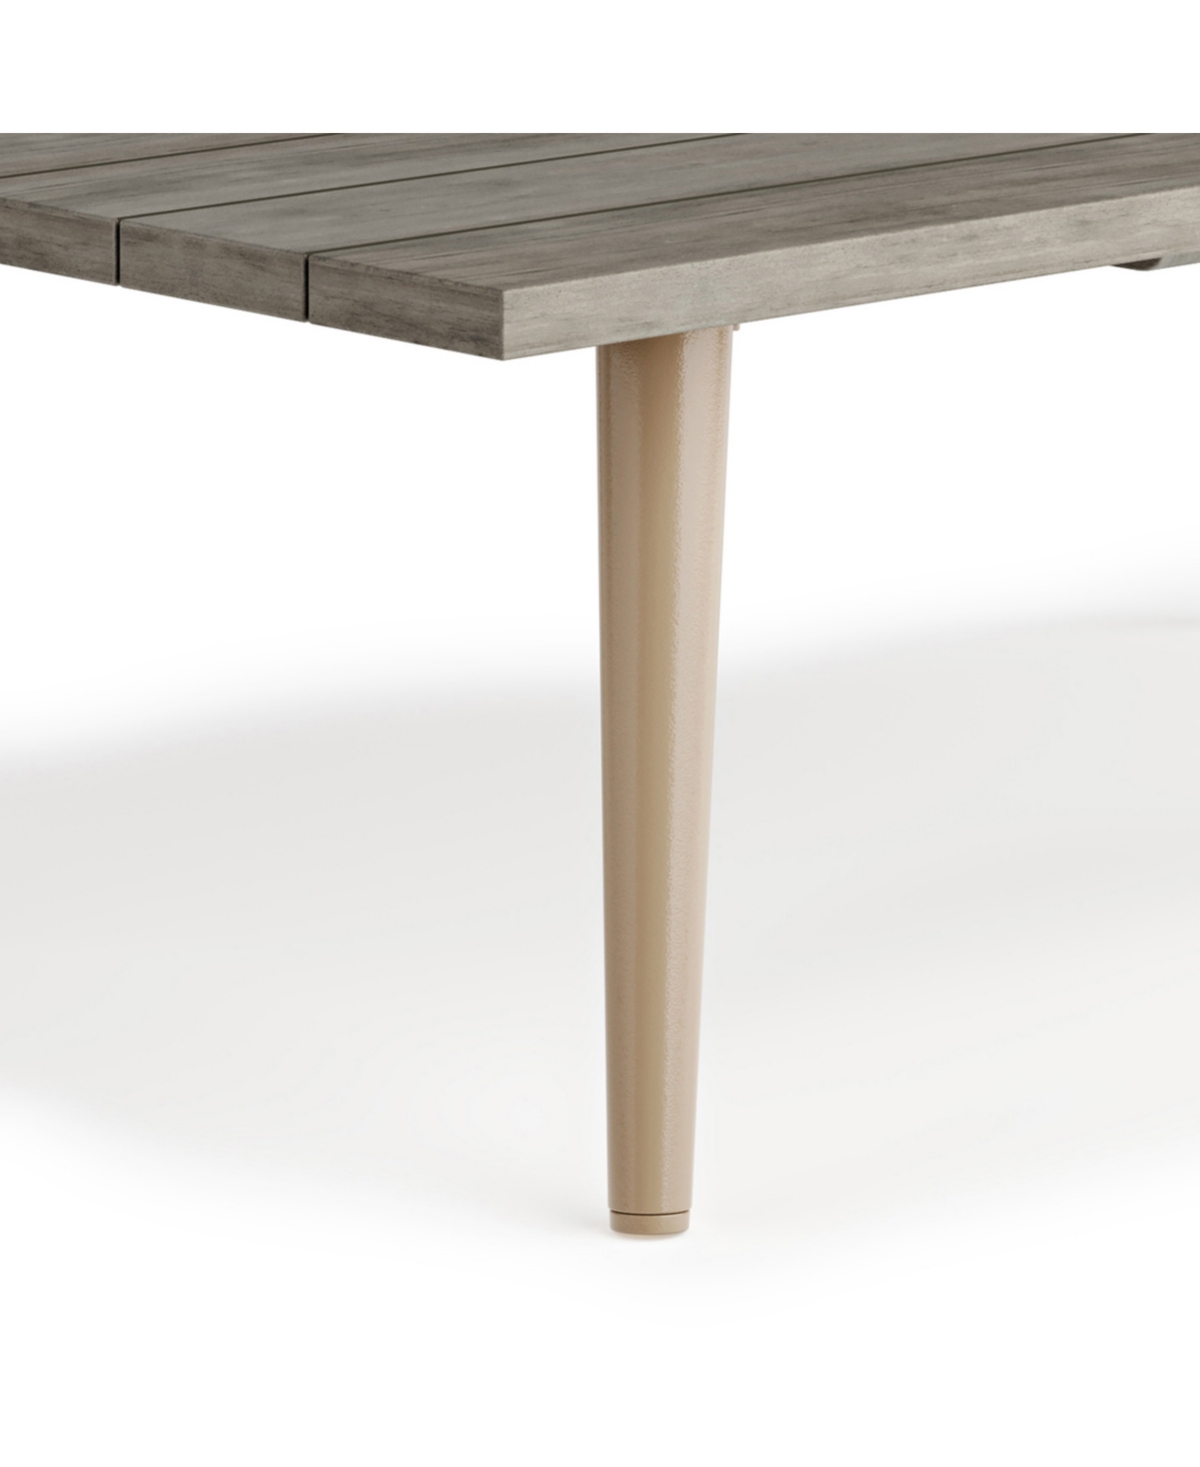 Shop Simpli Home Belize Solid Acacia Wood Outdoor Coffee Table In Distressed Weathered Grey